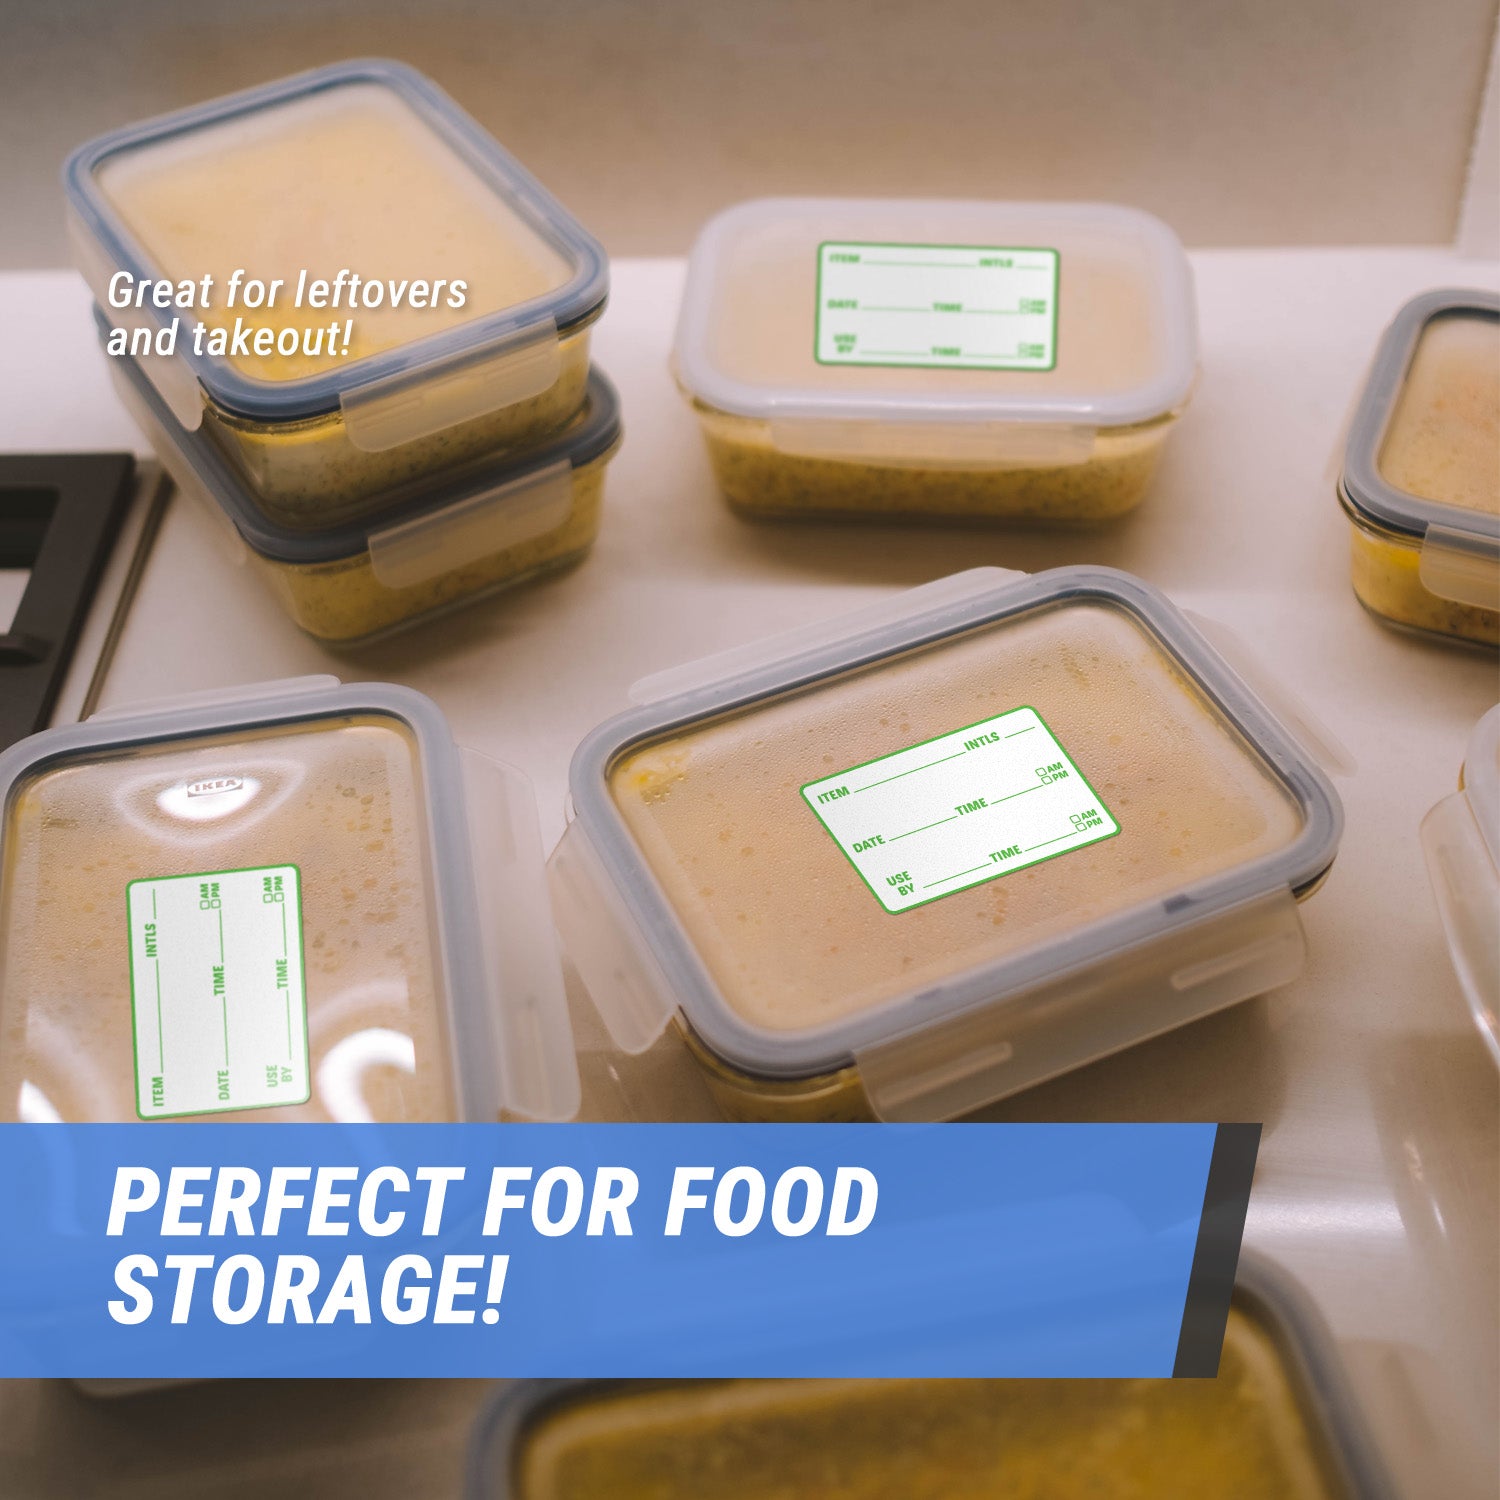 Food Containers - Store Leftovers, Ingredients & More - IKEA